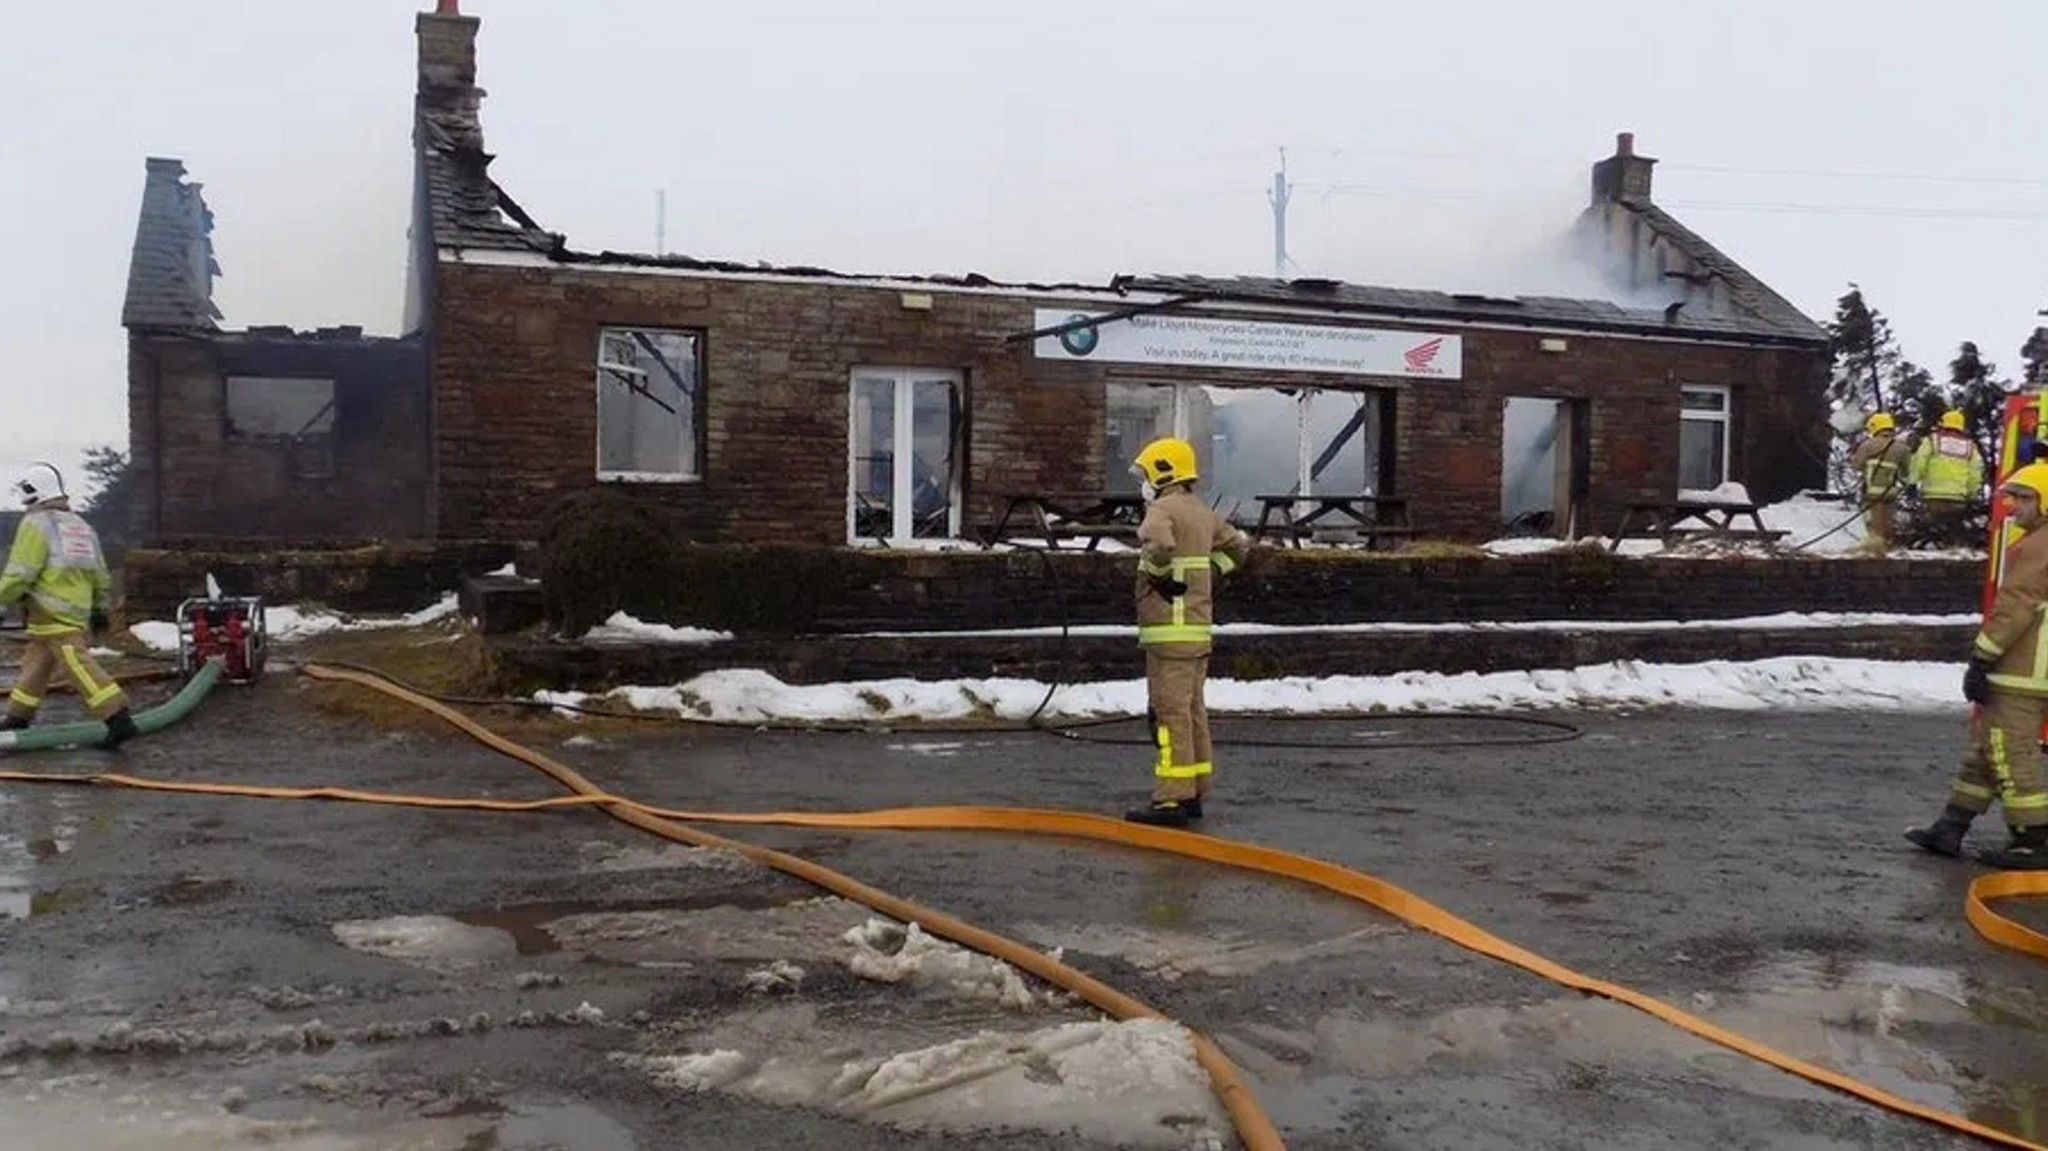 Firefighters at the scene of the blaze in 2018